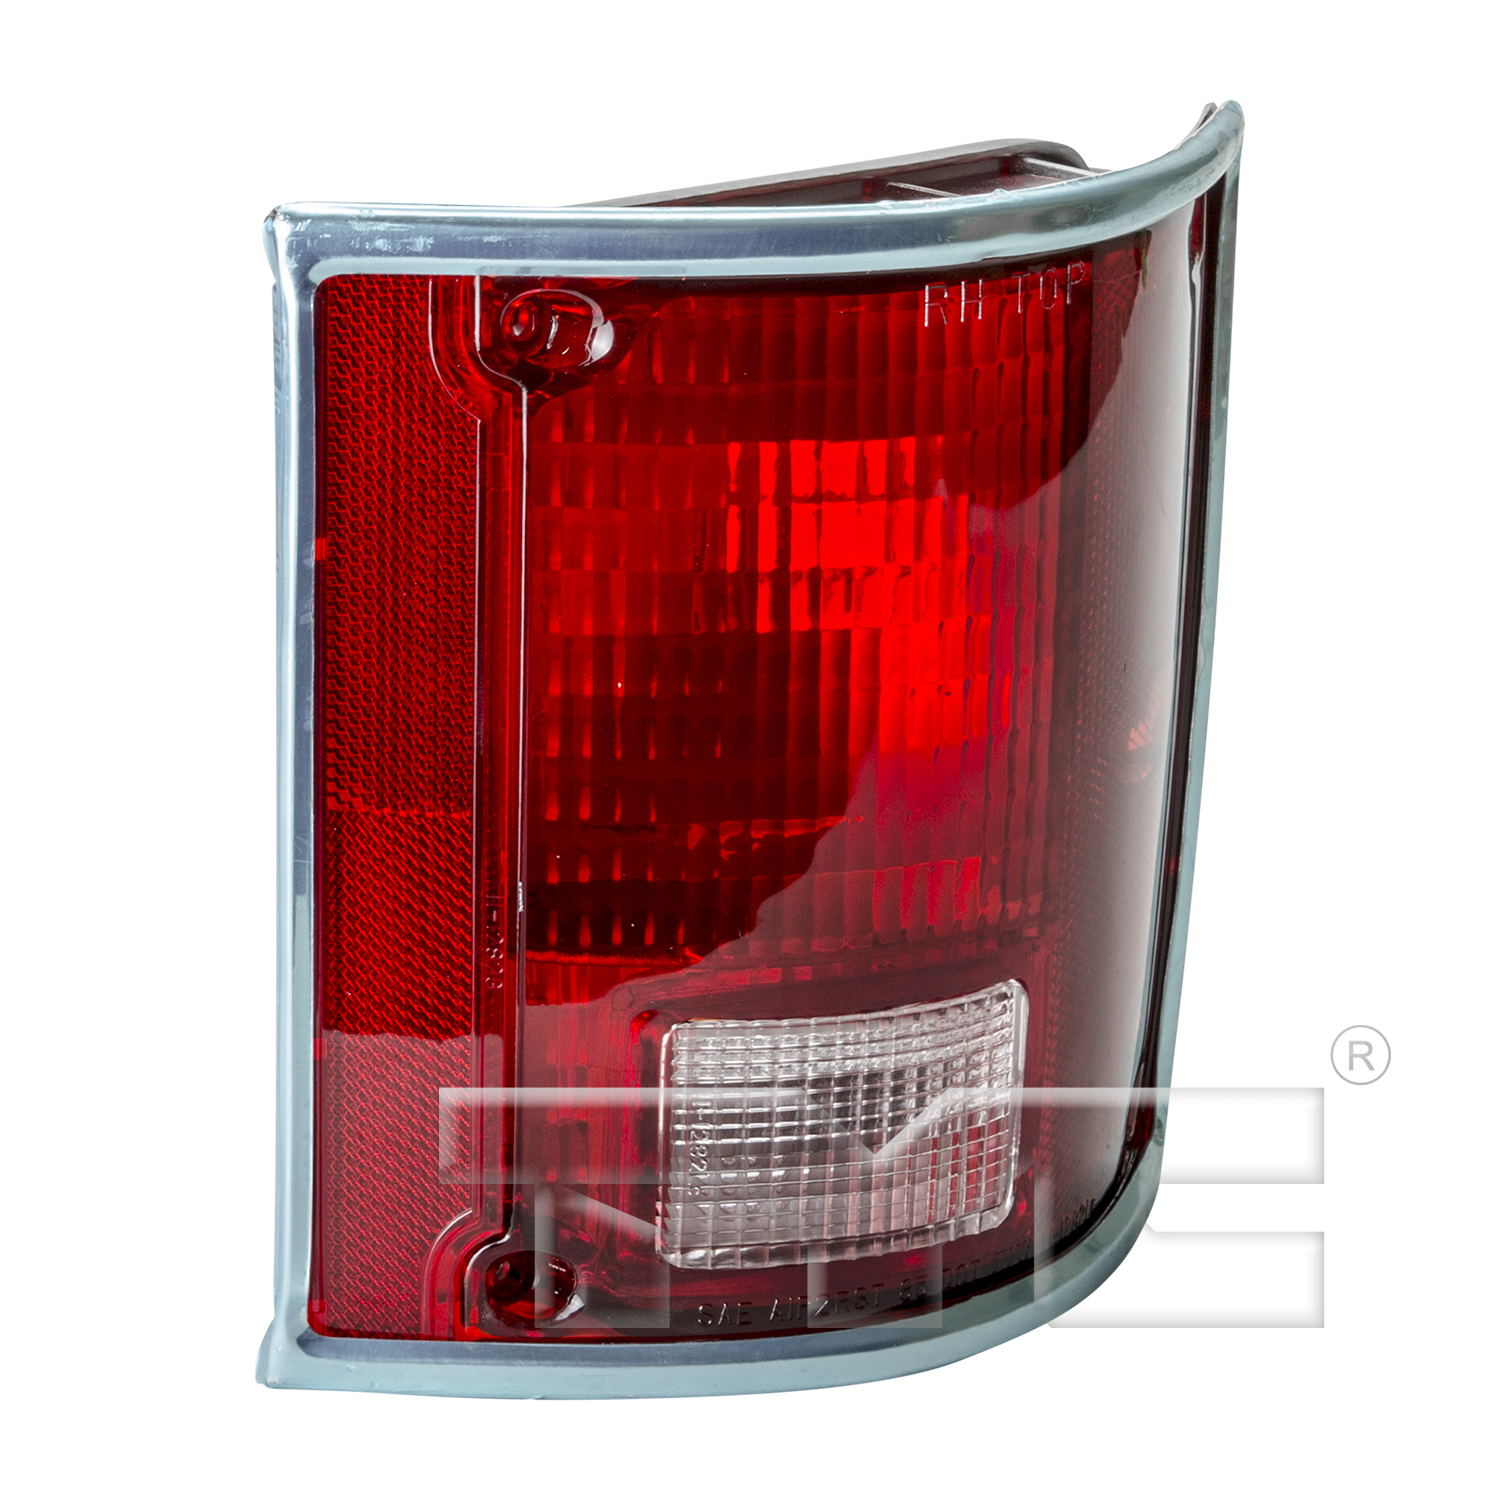 Aftermarket TAILLIGHTS for GMC - K1500, K1500,79-91,RT Taillamp assy